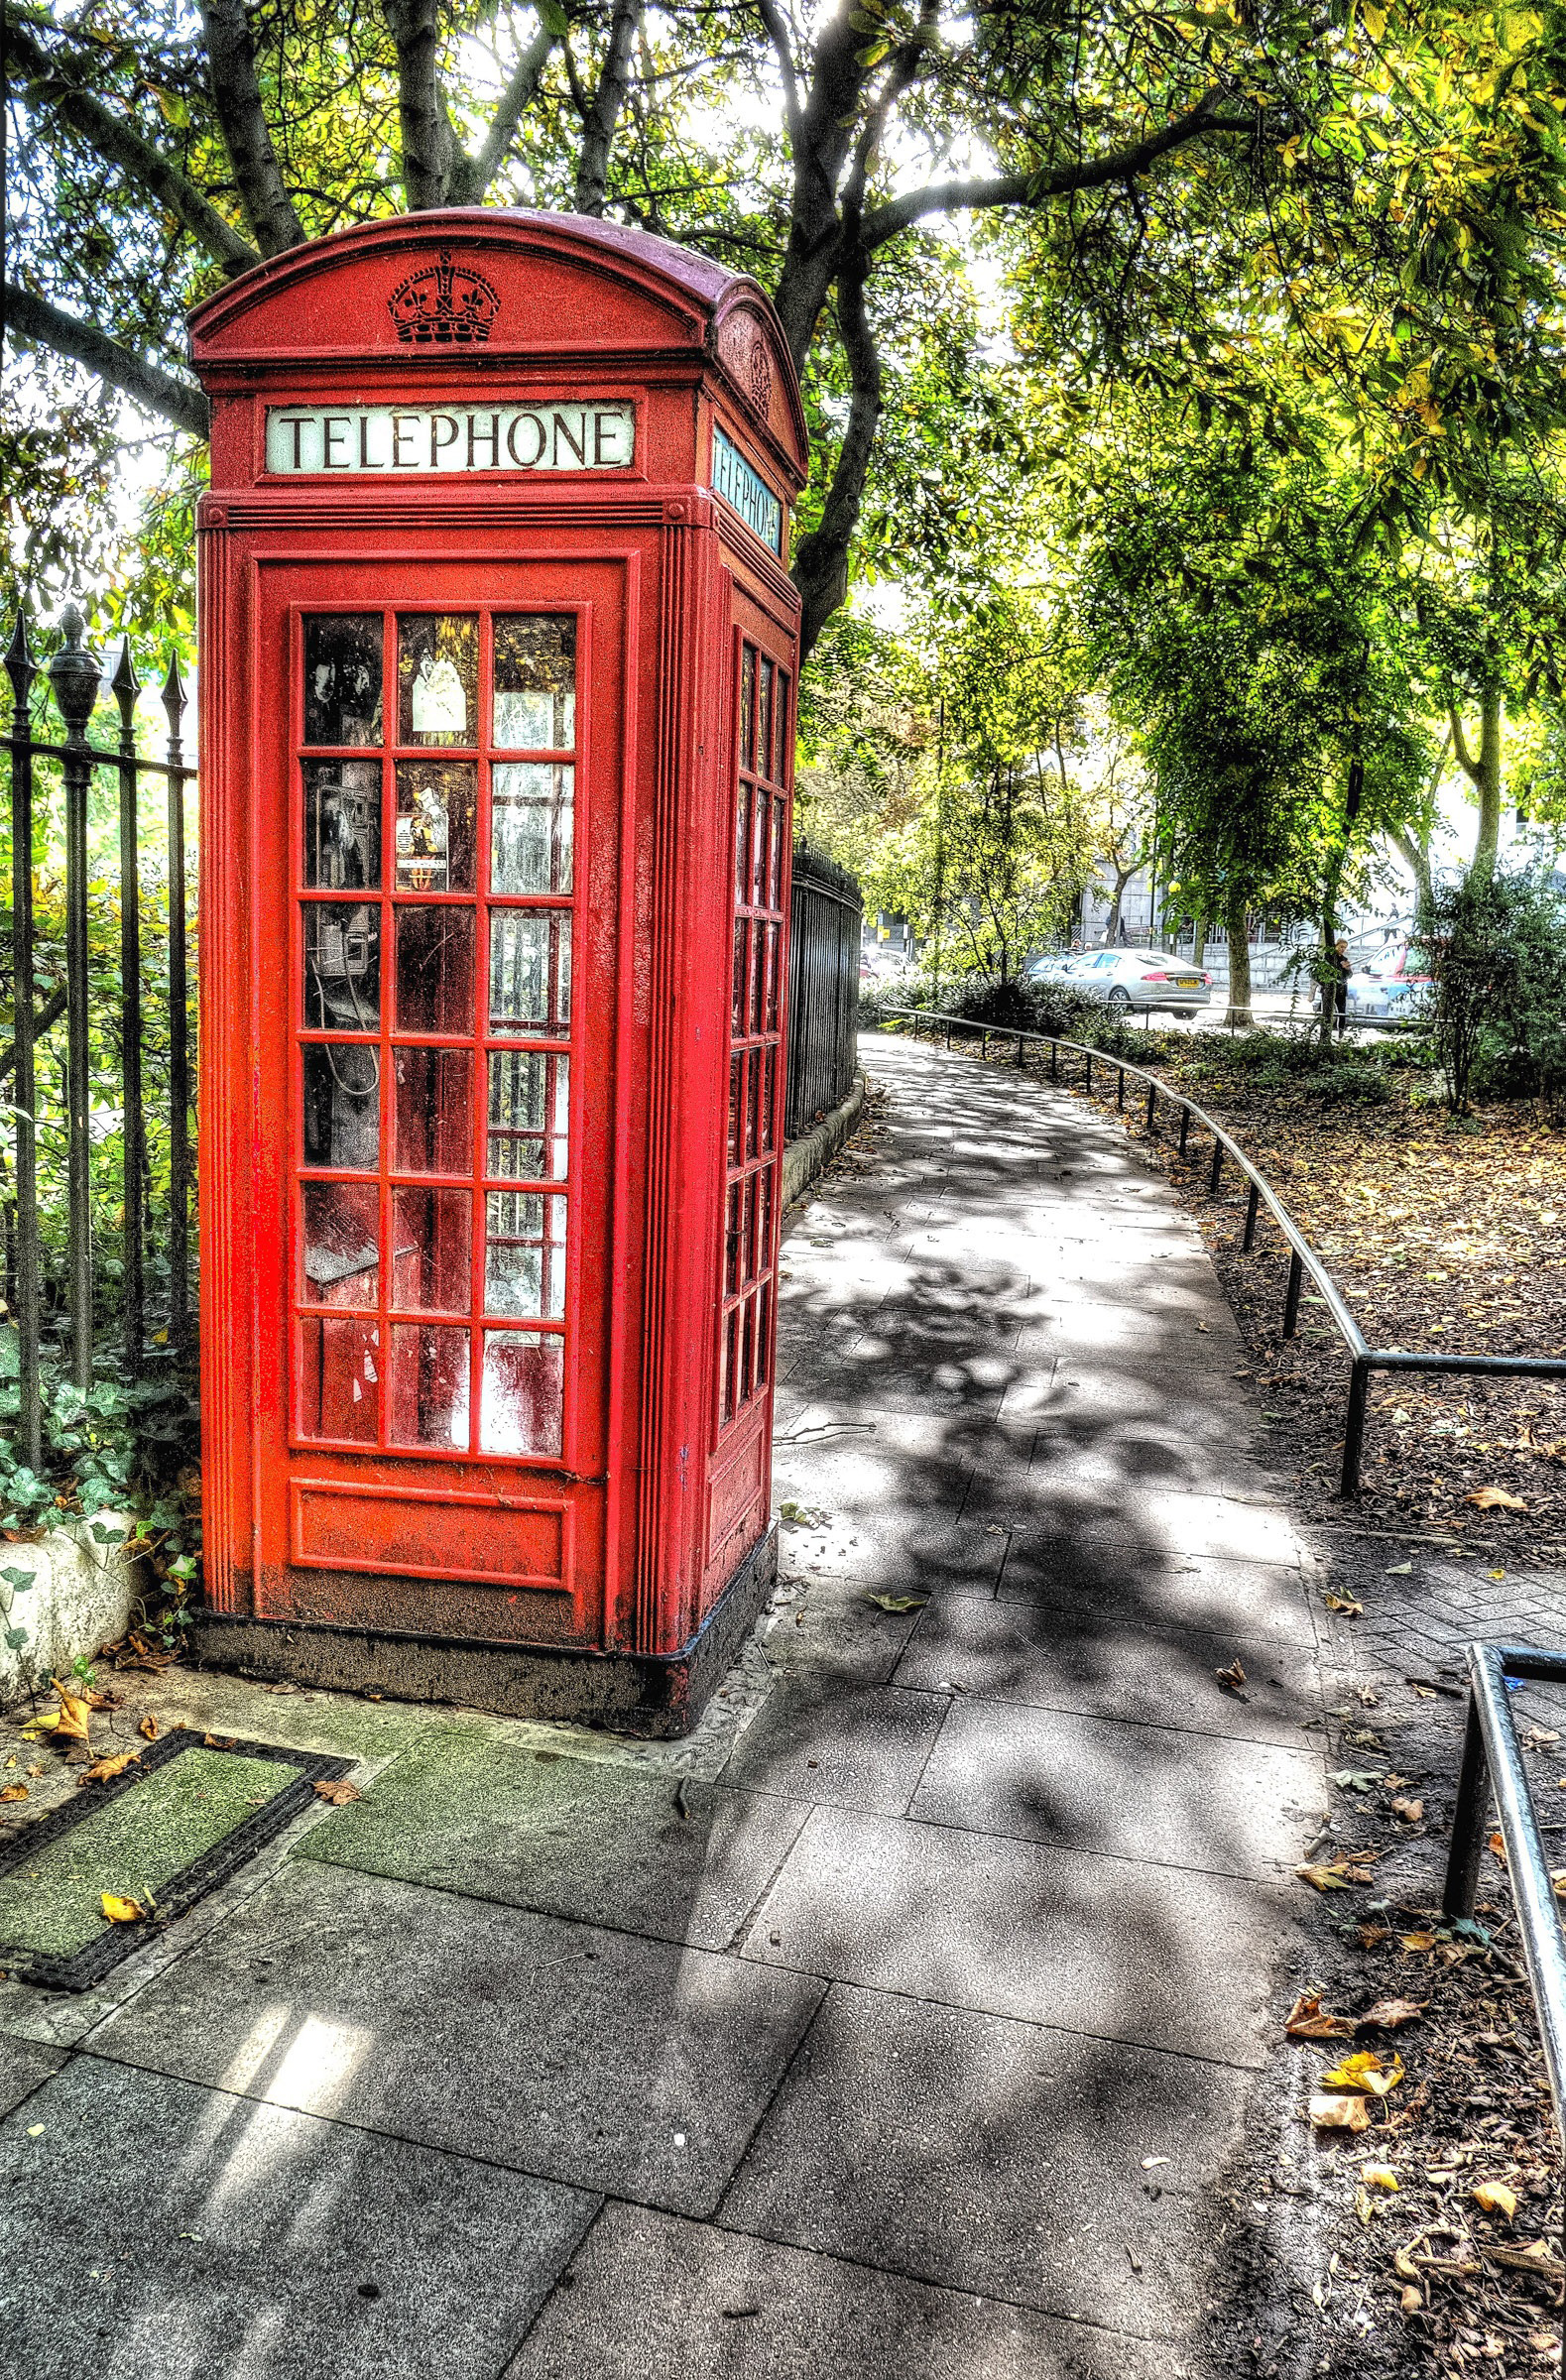 Red Telephone Booth image - Free stock photo - Public ...